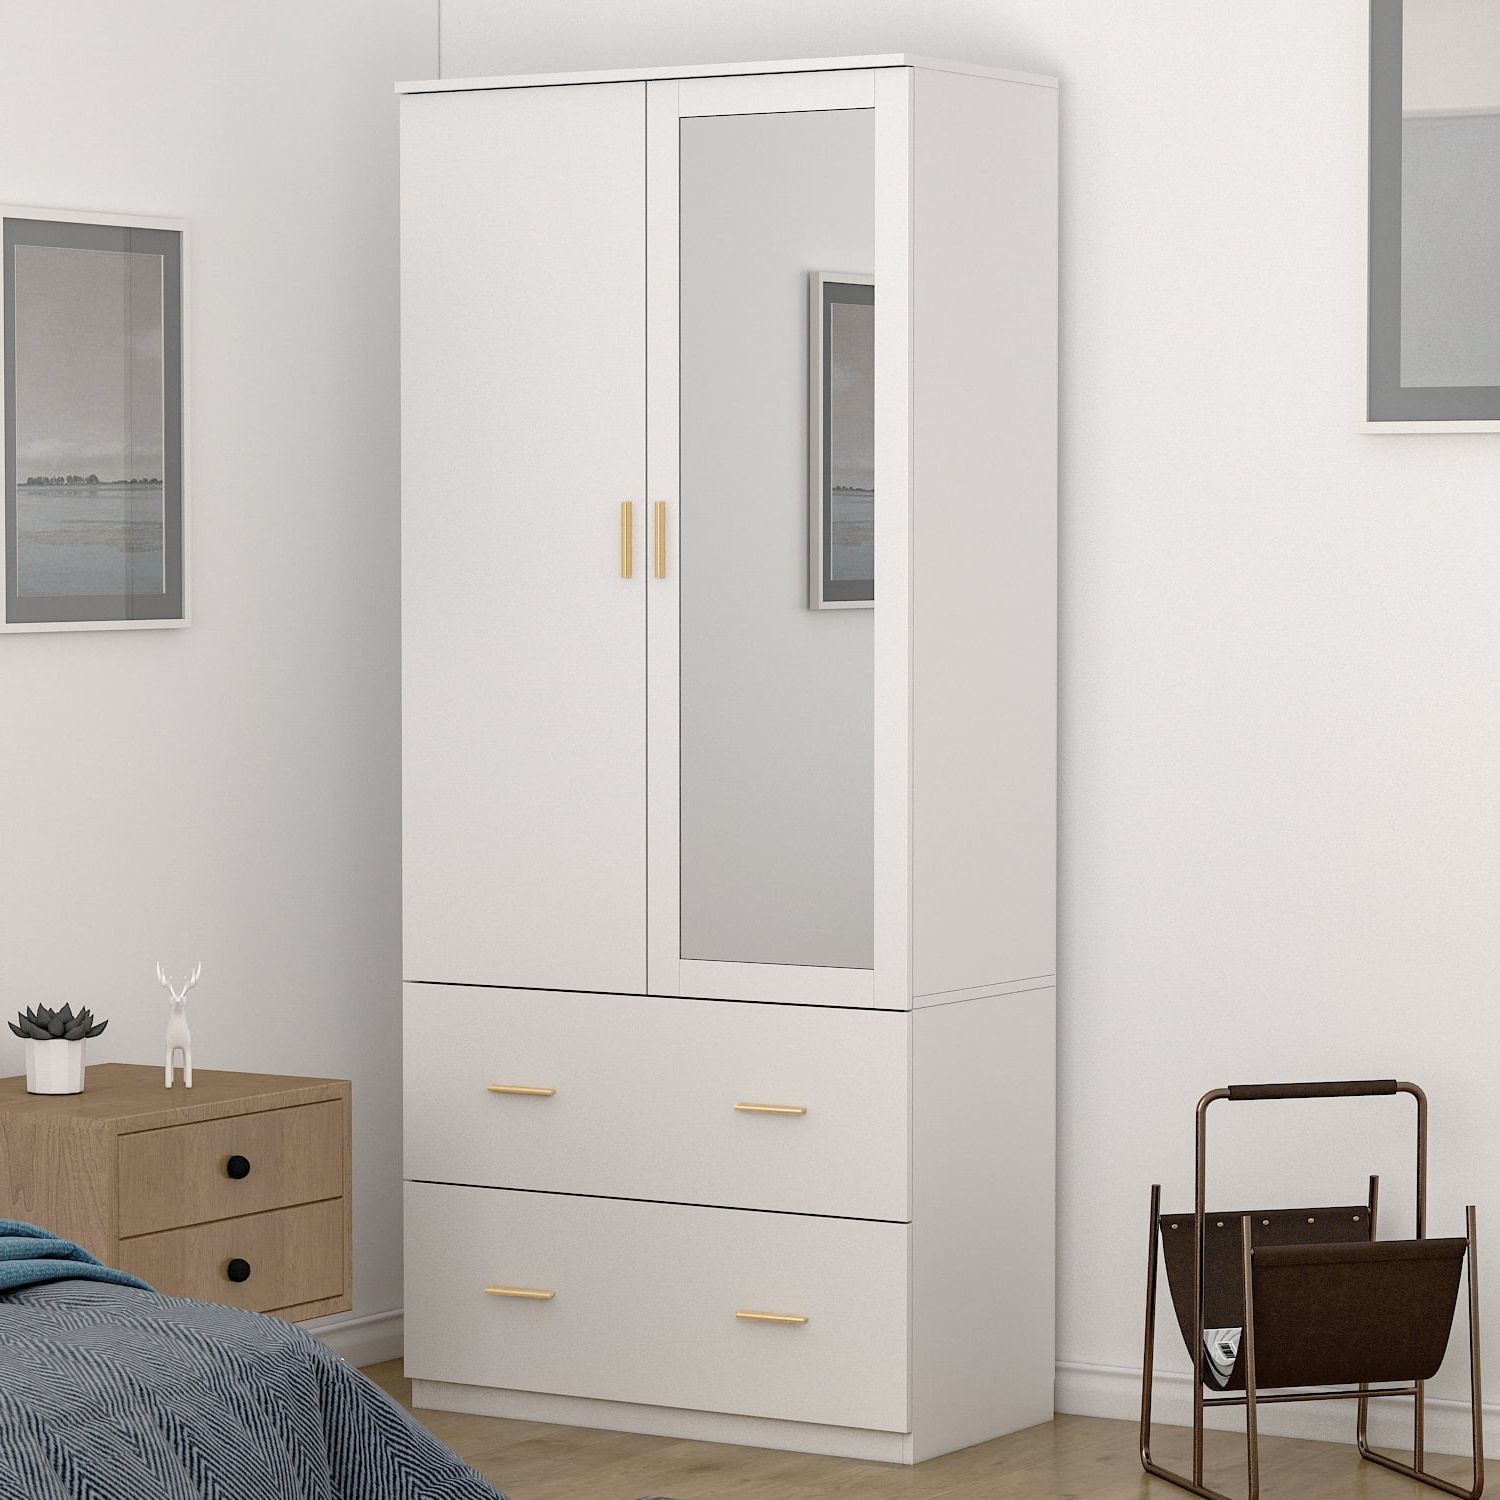 Didugo Armoire Wardrobe Closet With Mirror Doors And Hanging Rod For  Bedroom White – Walmart For Single White Wardrobes With Mirror (View 15 of 20)